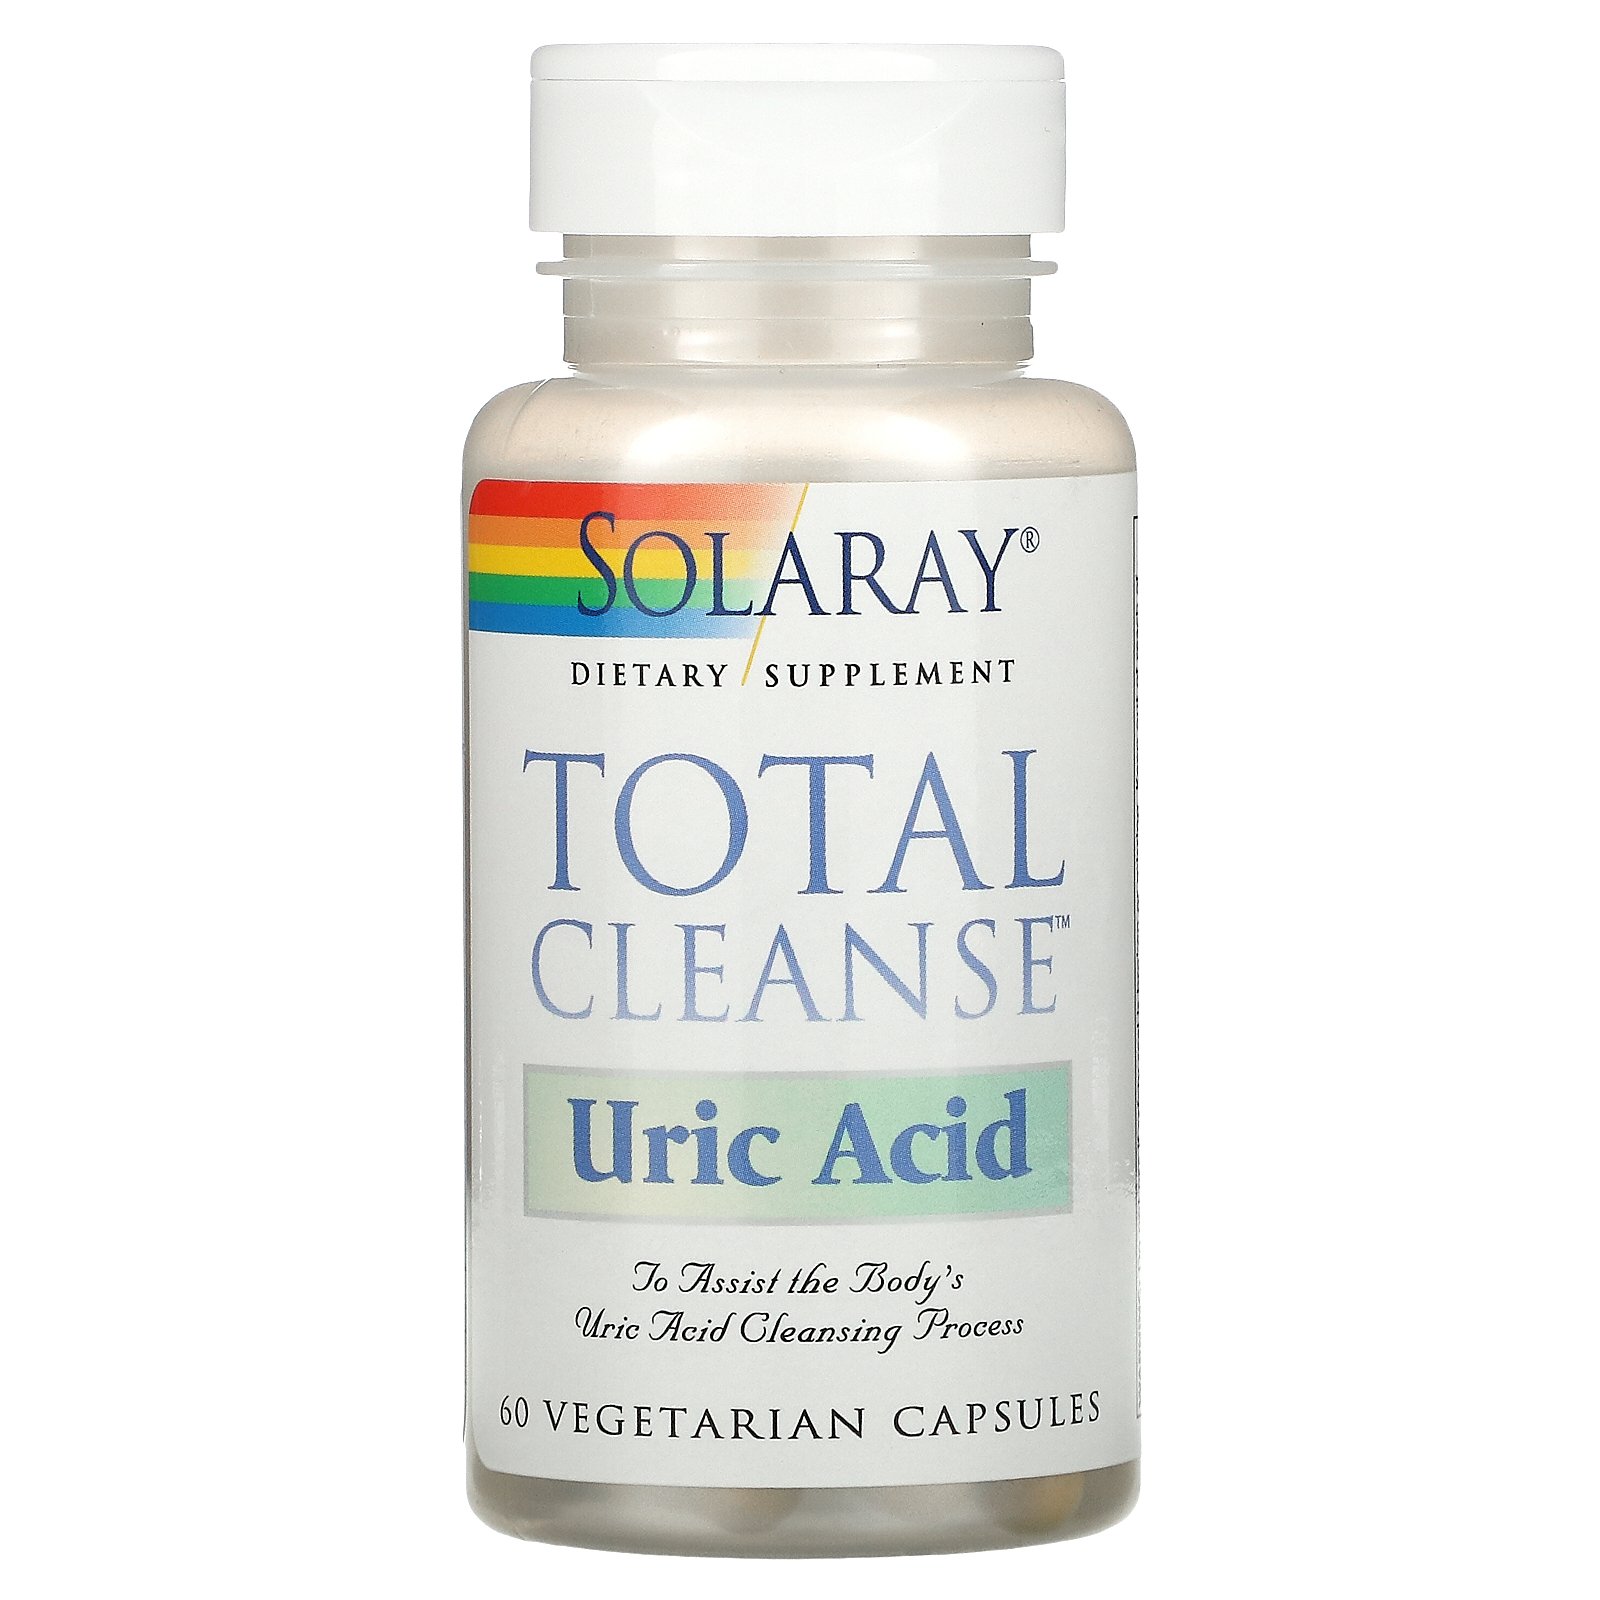 total cleanse solaray)